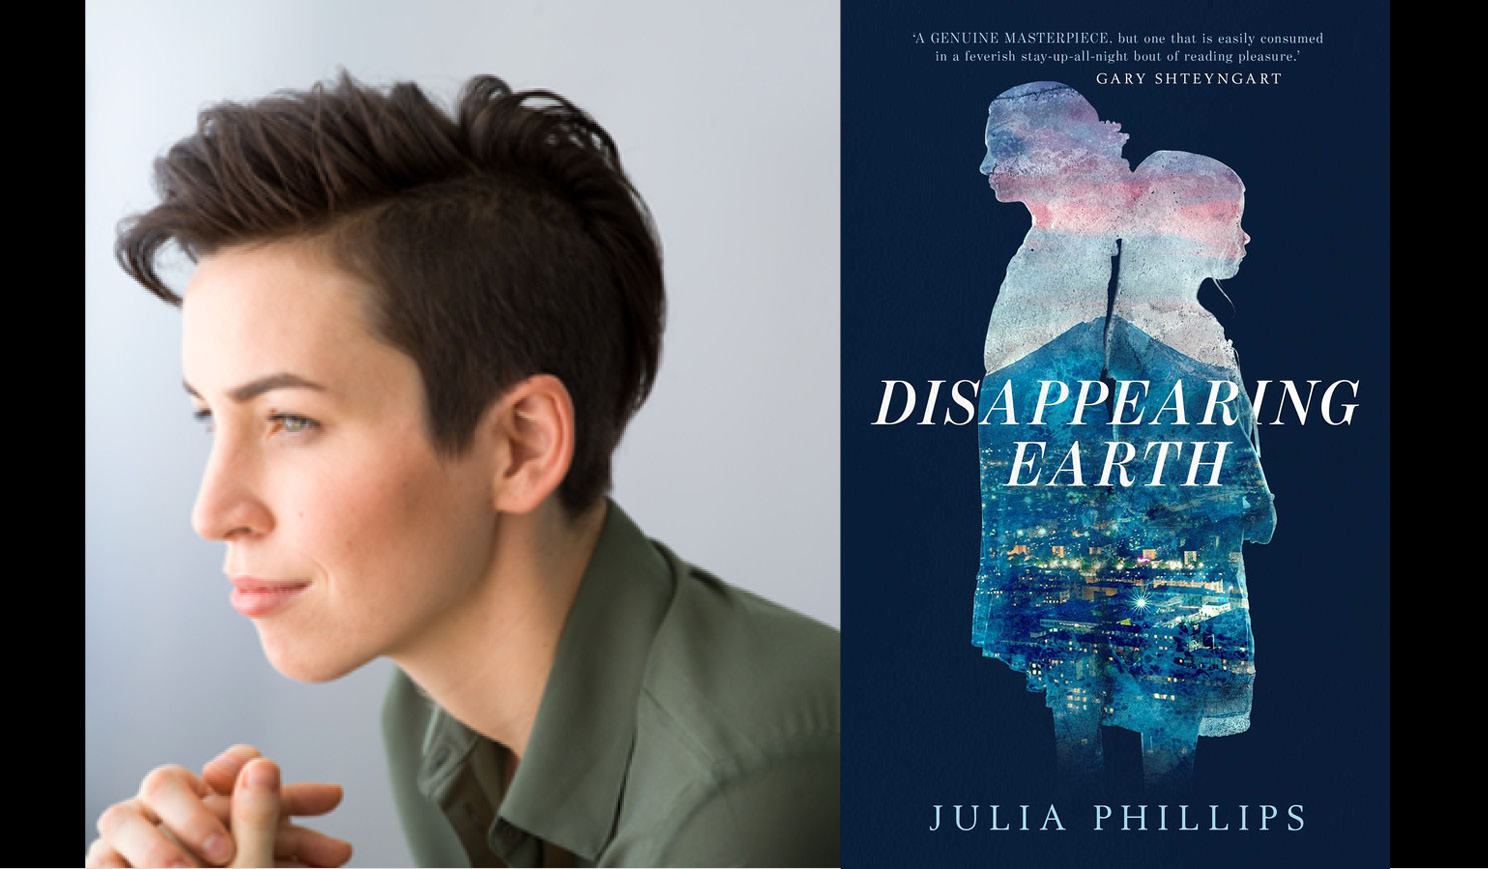 Julie Phillips' headshot alongside the cover of her book Disappearing Earth